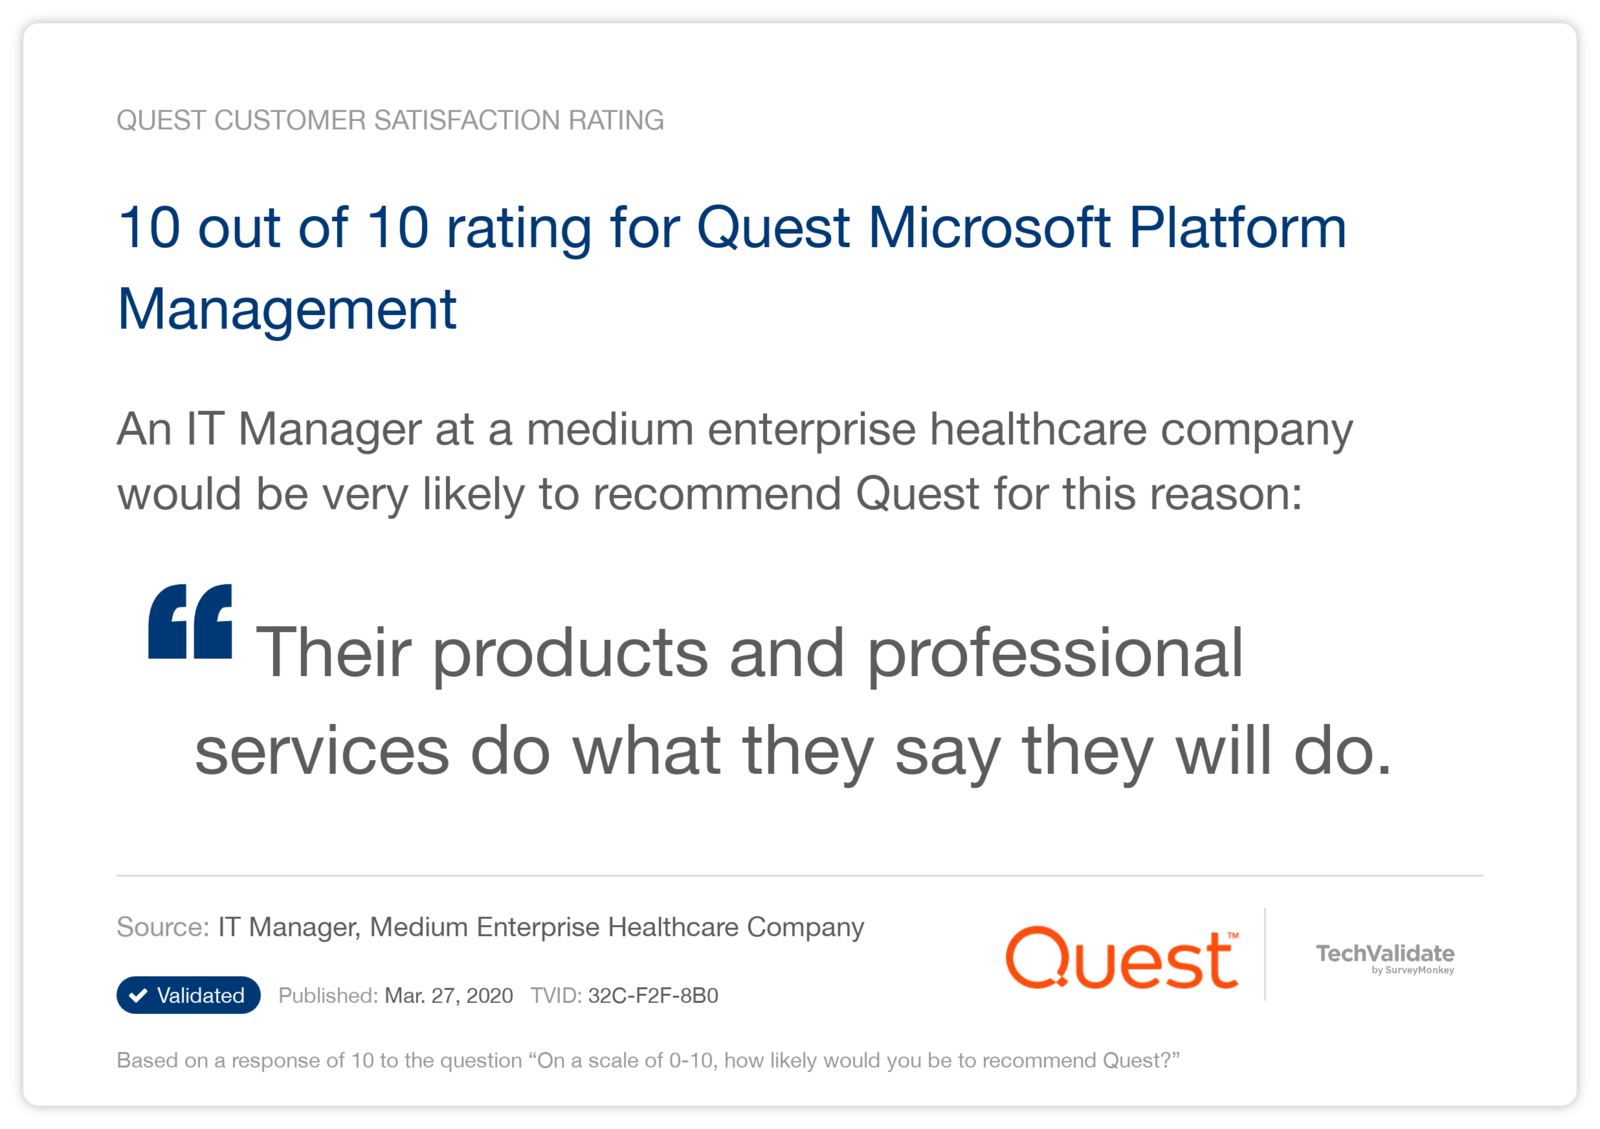 10 out of 10 rating for Quest Microsoft Platform Management